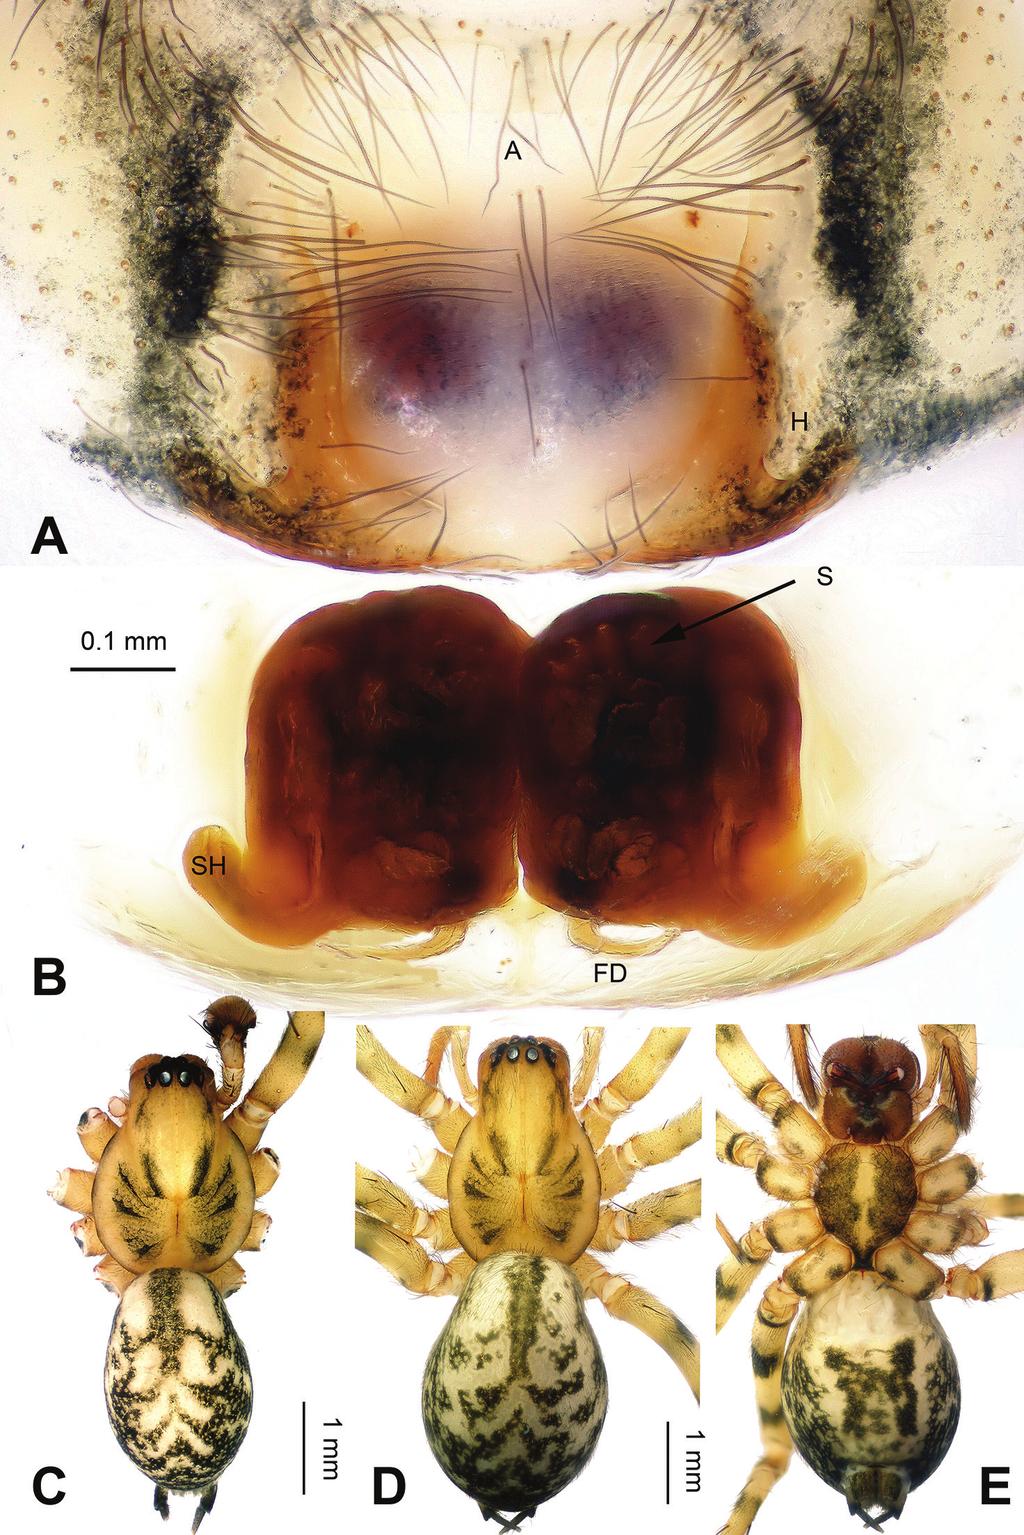 Five new Platocoelotes species (Araneae, Agelenidae) from caves in southern China 11 Figure 6. Platocoelotes shuiensis sp. n., one paratype female.